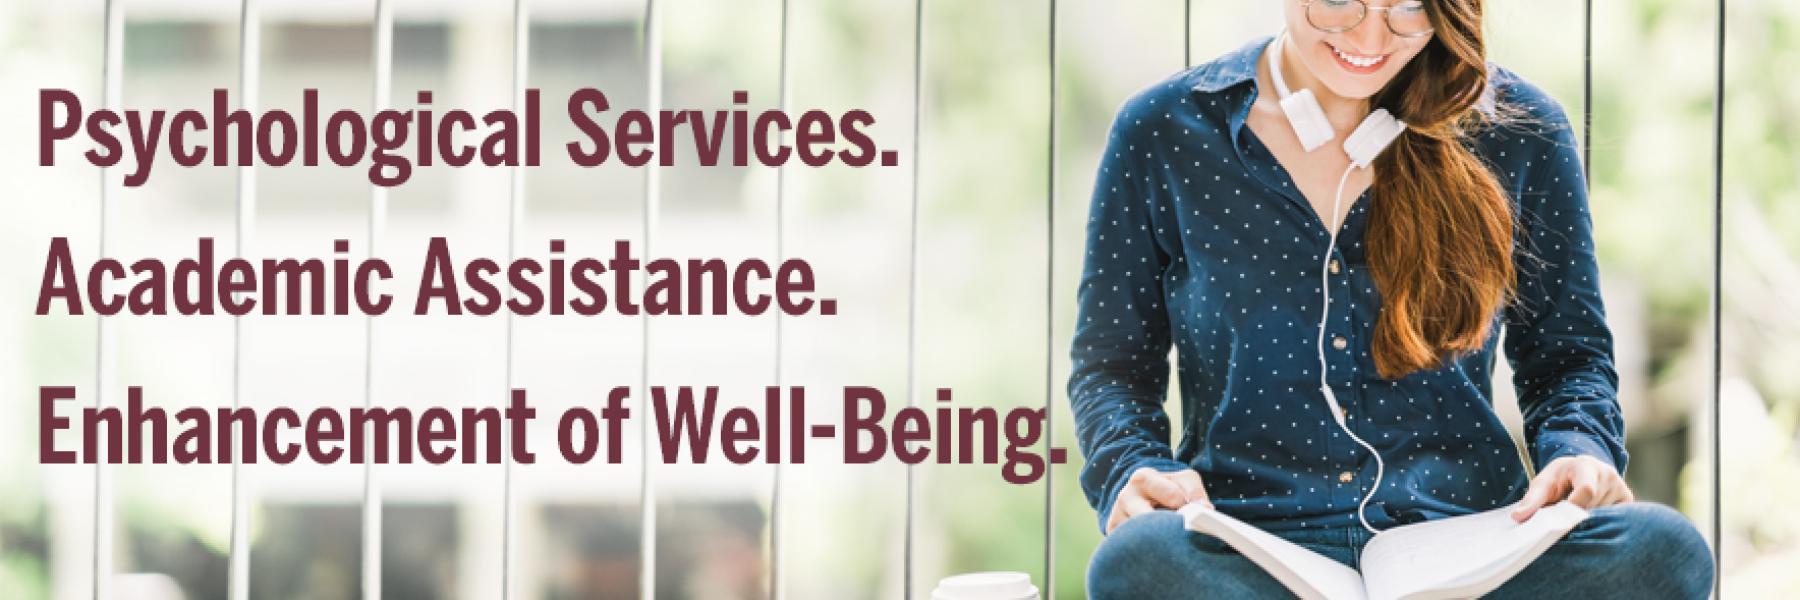 Psychological Services, Academic Assistance, Enhancement of well-being